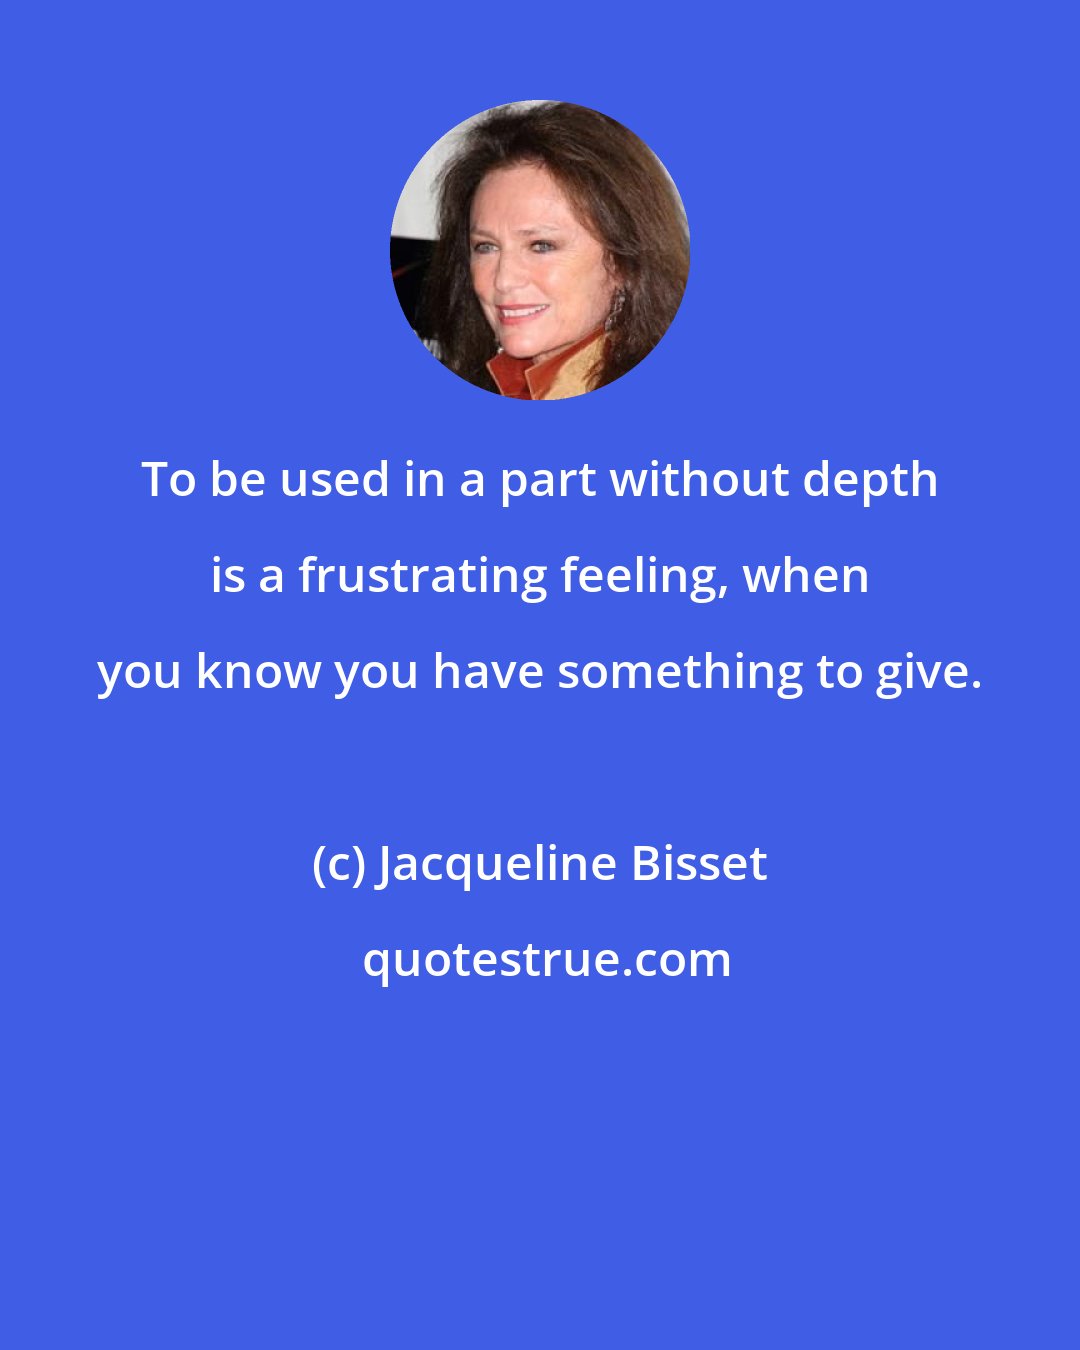 Jacqueline Bisset: To be used in a part without depth is a frustrating feeling, when you know you have something to give.